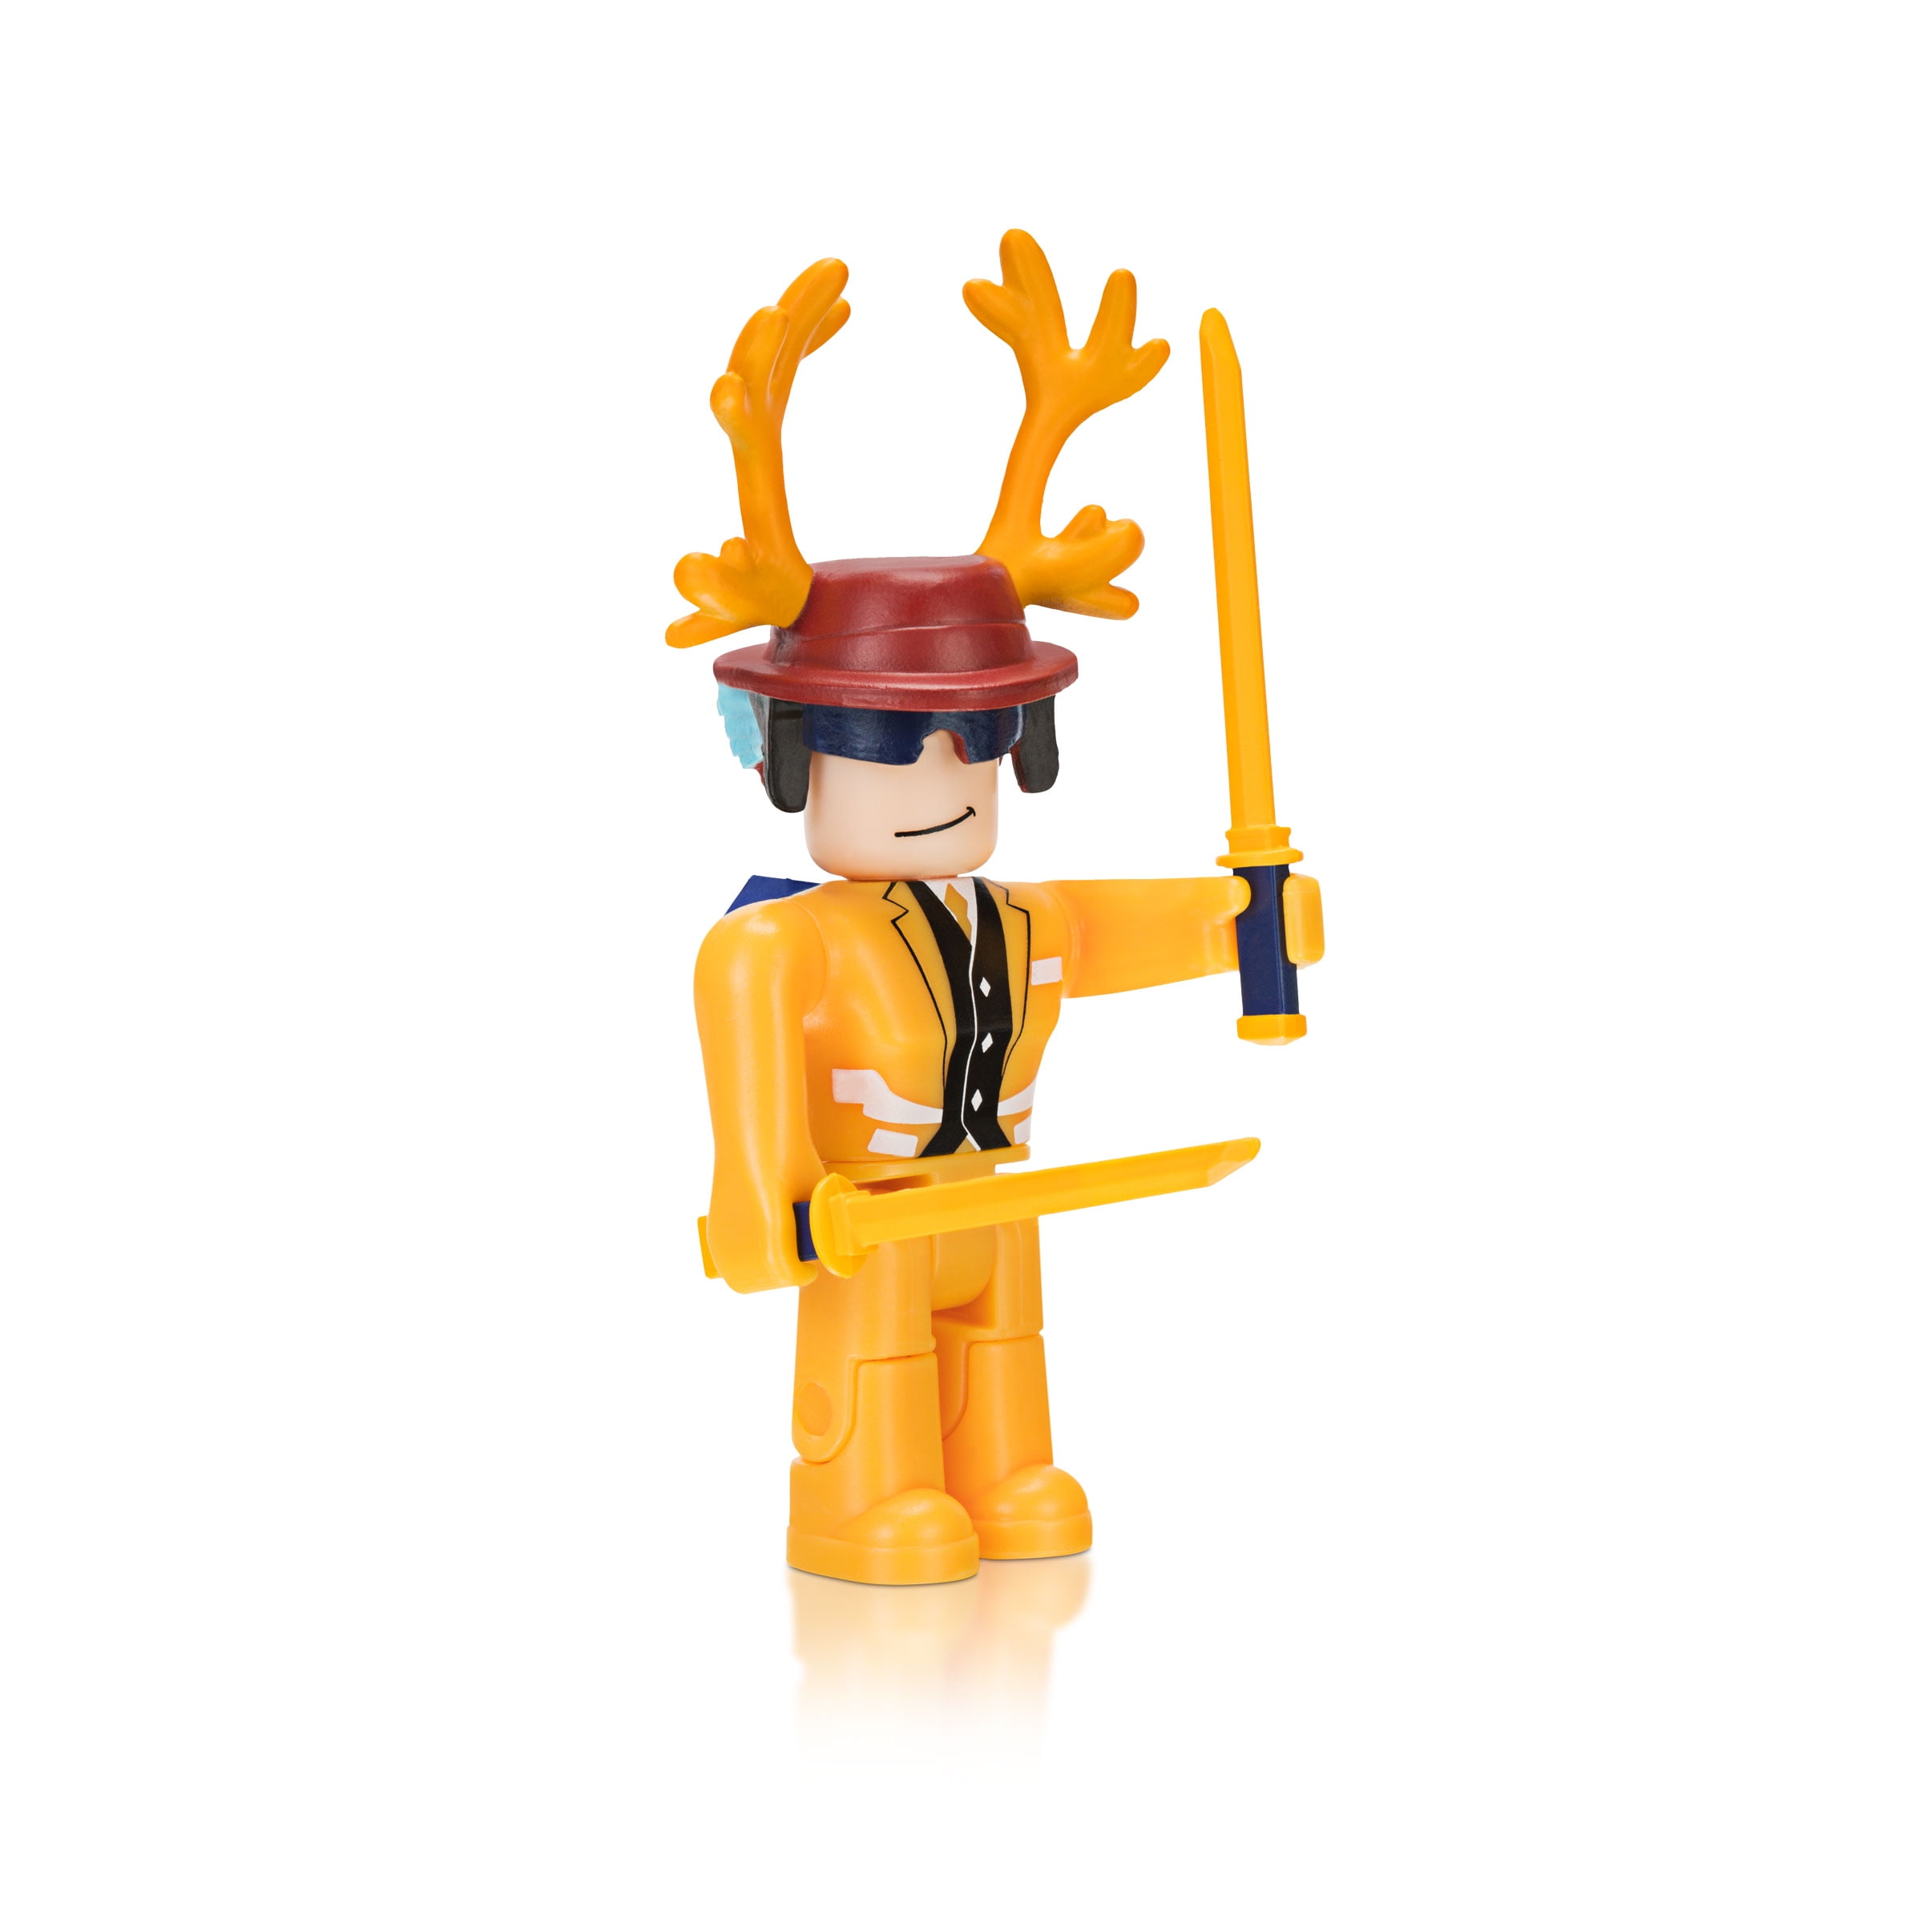 Roblox Action Collection Series 6 Mystery Figure Includes 1 Figure Exclusive Virtual Item Walmart Com Walmart Com - roblox celebrity mystery figure series 2 walmart com walmart com